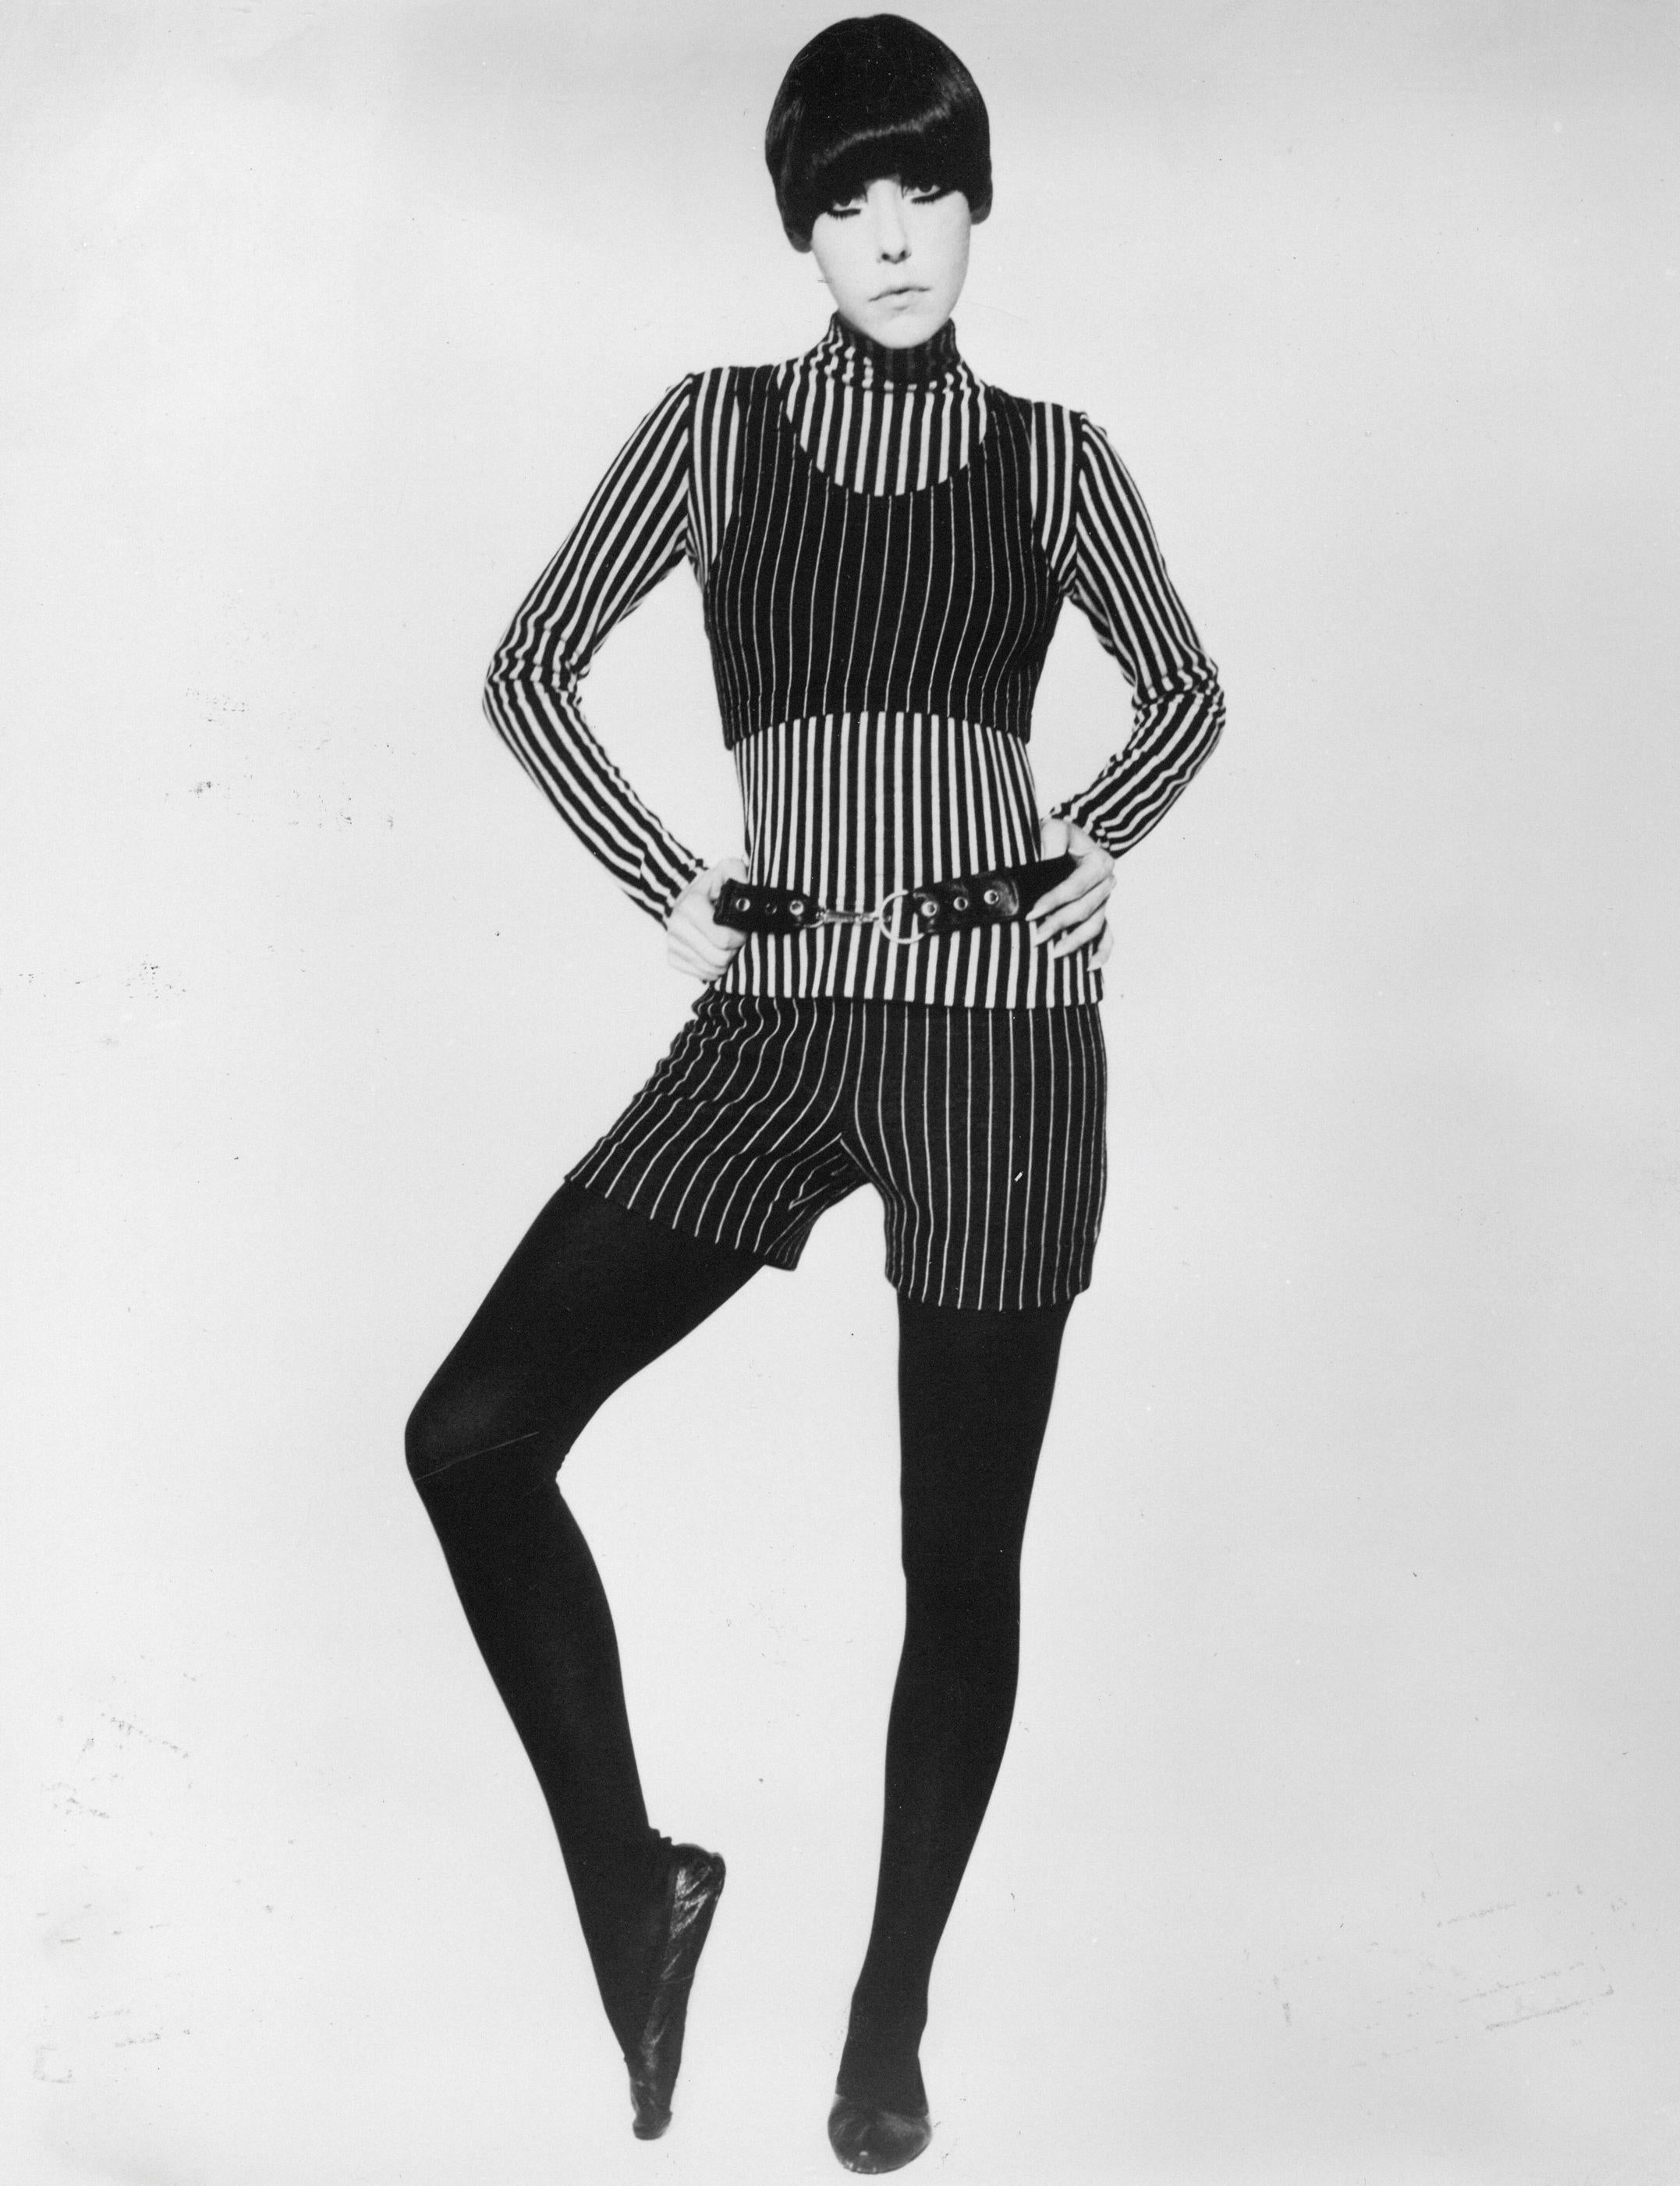 Unknown Black and White Photograph - 70s Fashion: Model in Pinstripes Vintage Original Photograph